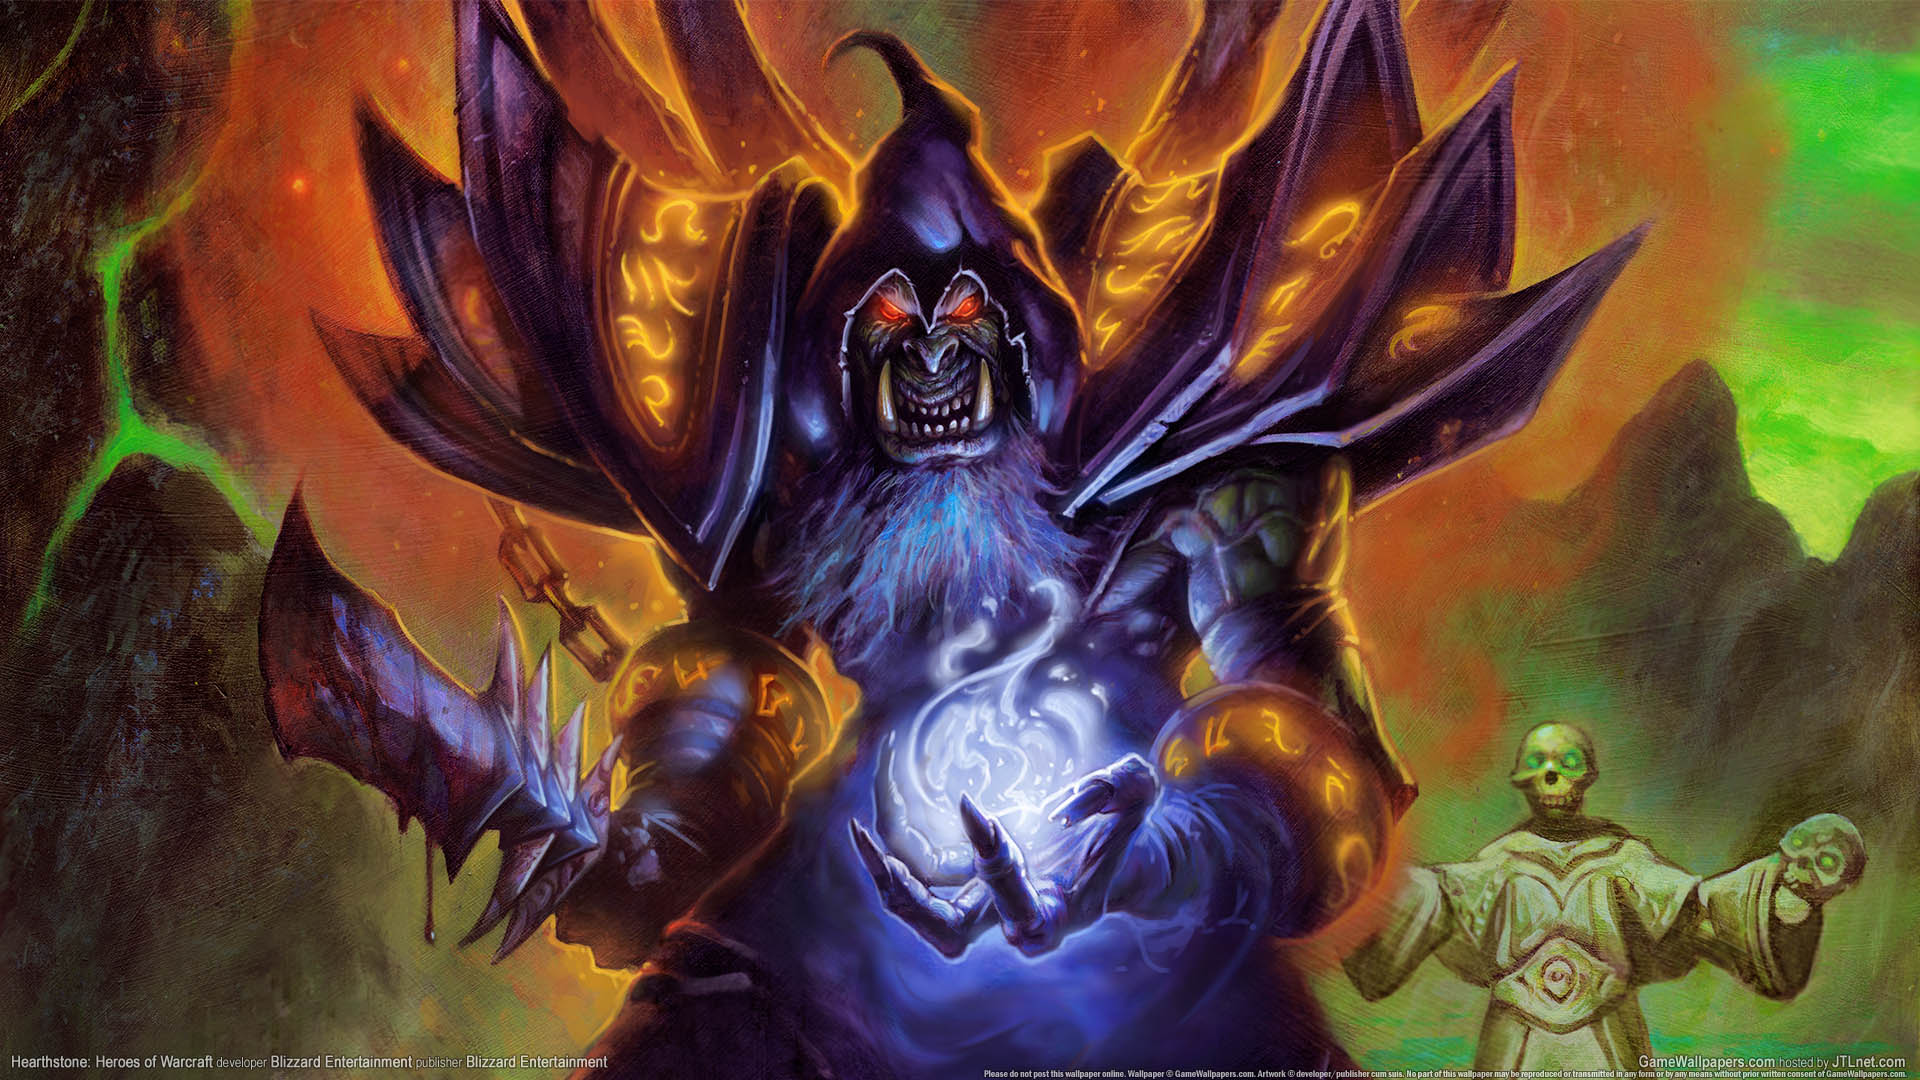 Hearthstone: Heroes of Warcraft achtergrond 07 1920x1080